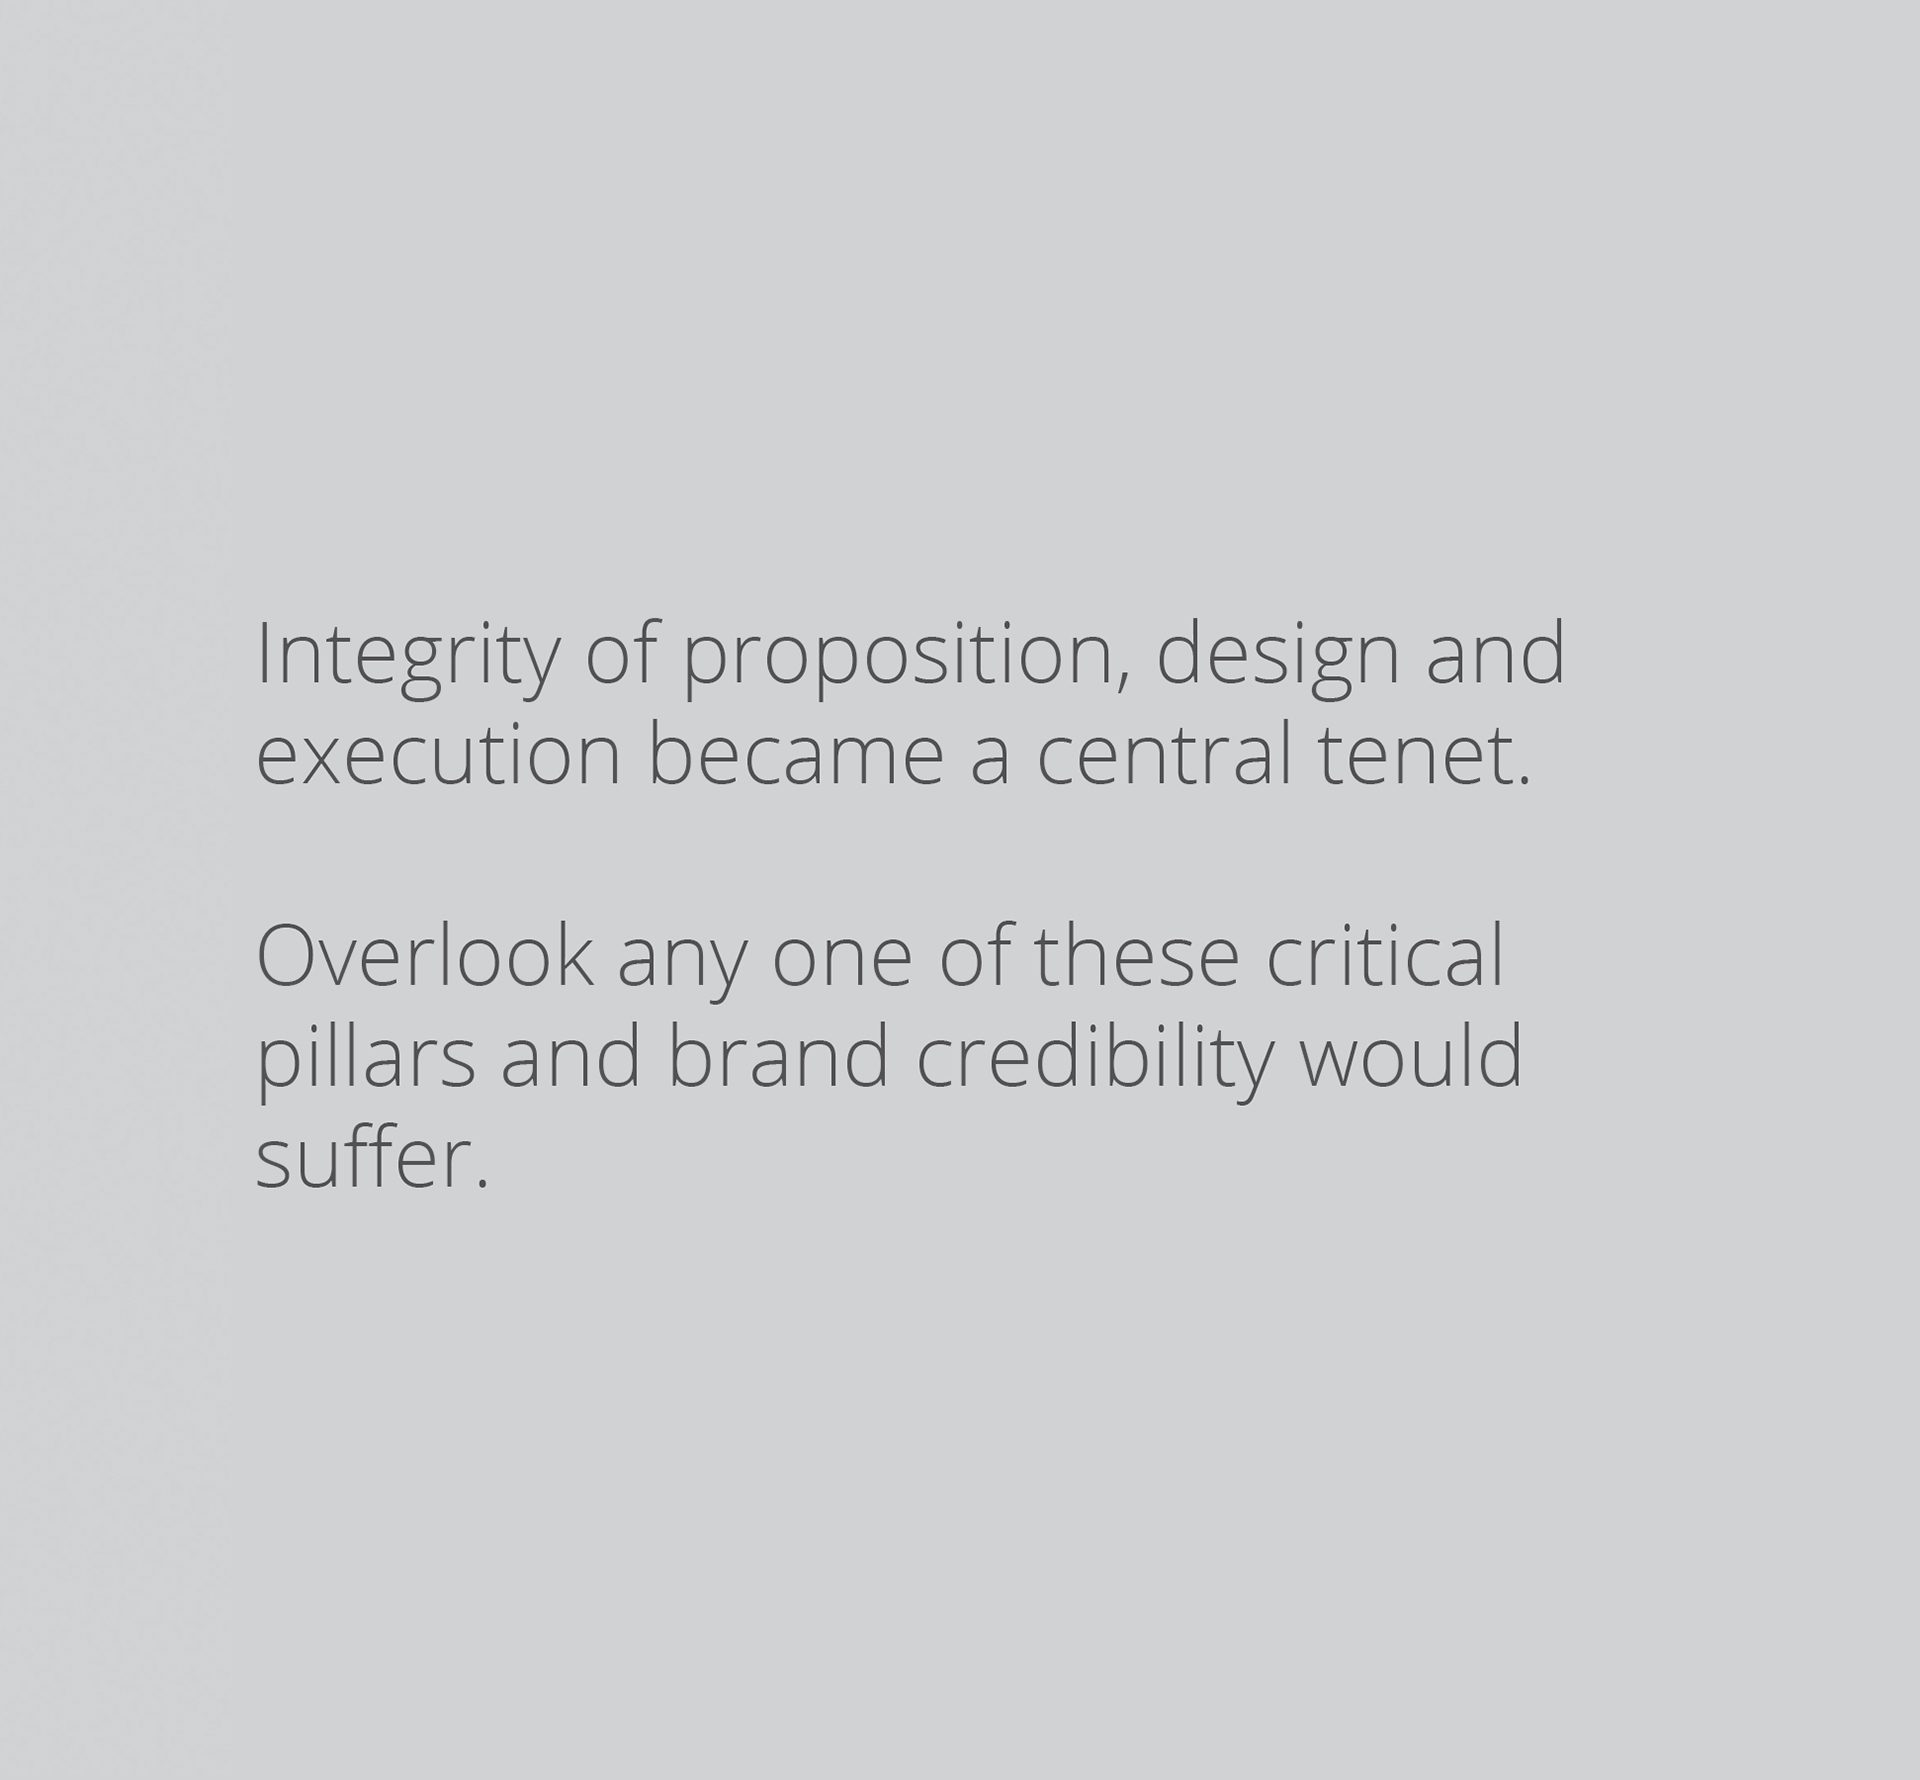 Integrity of proposition, design and executing for Goodmans